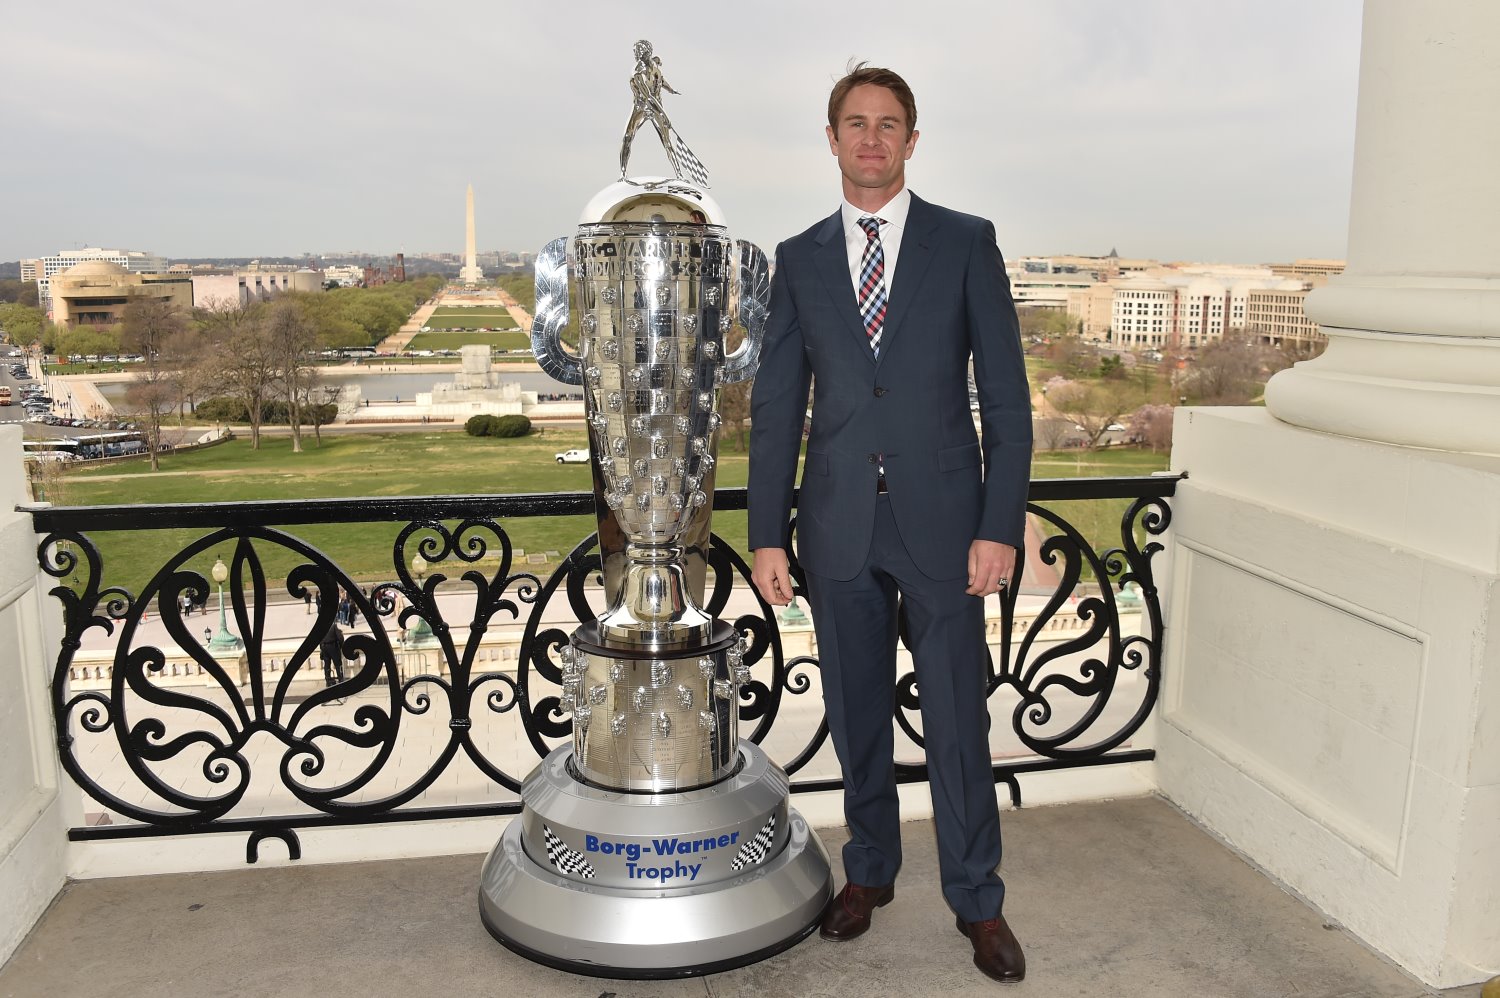 Hunter-Reay with the Borg Warner Trophy overlooking the Washington Monument